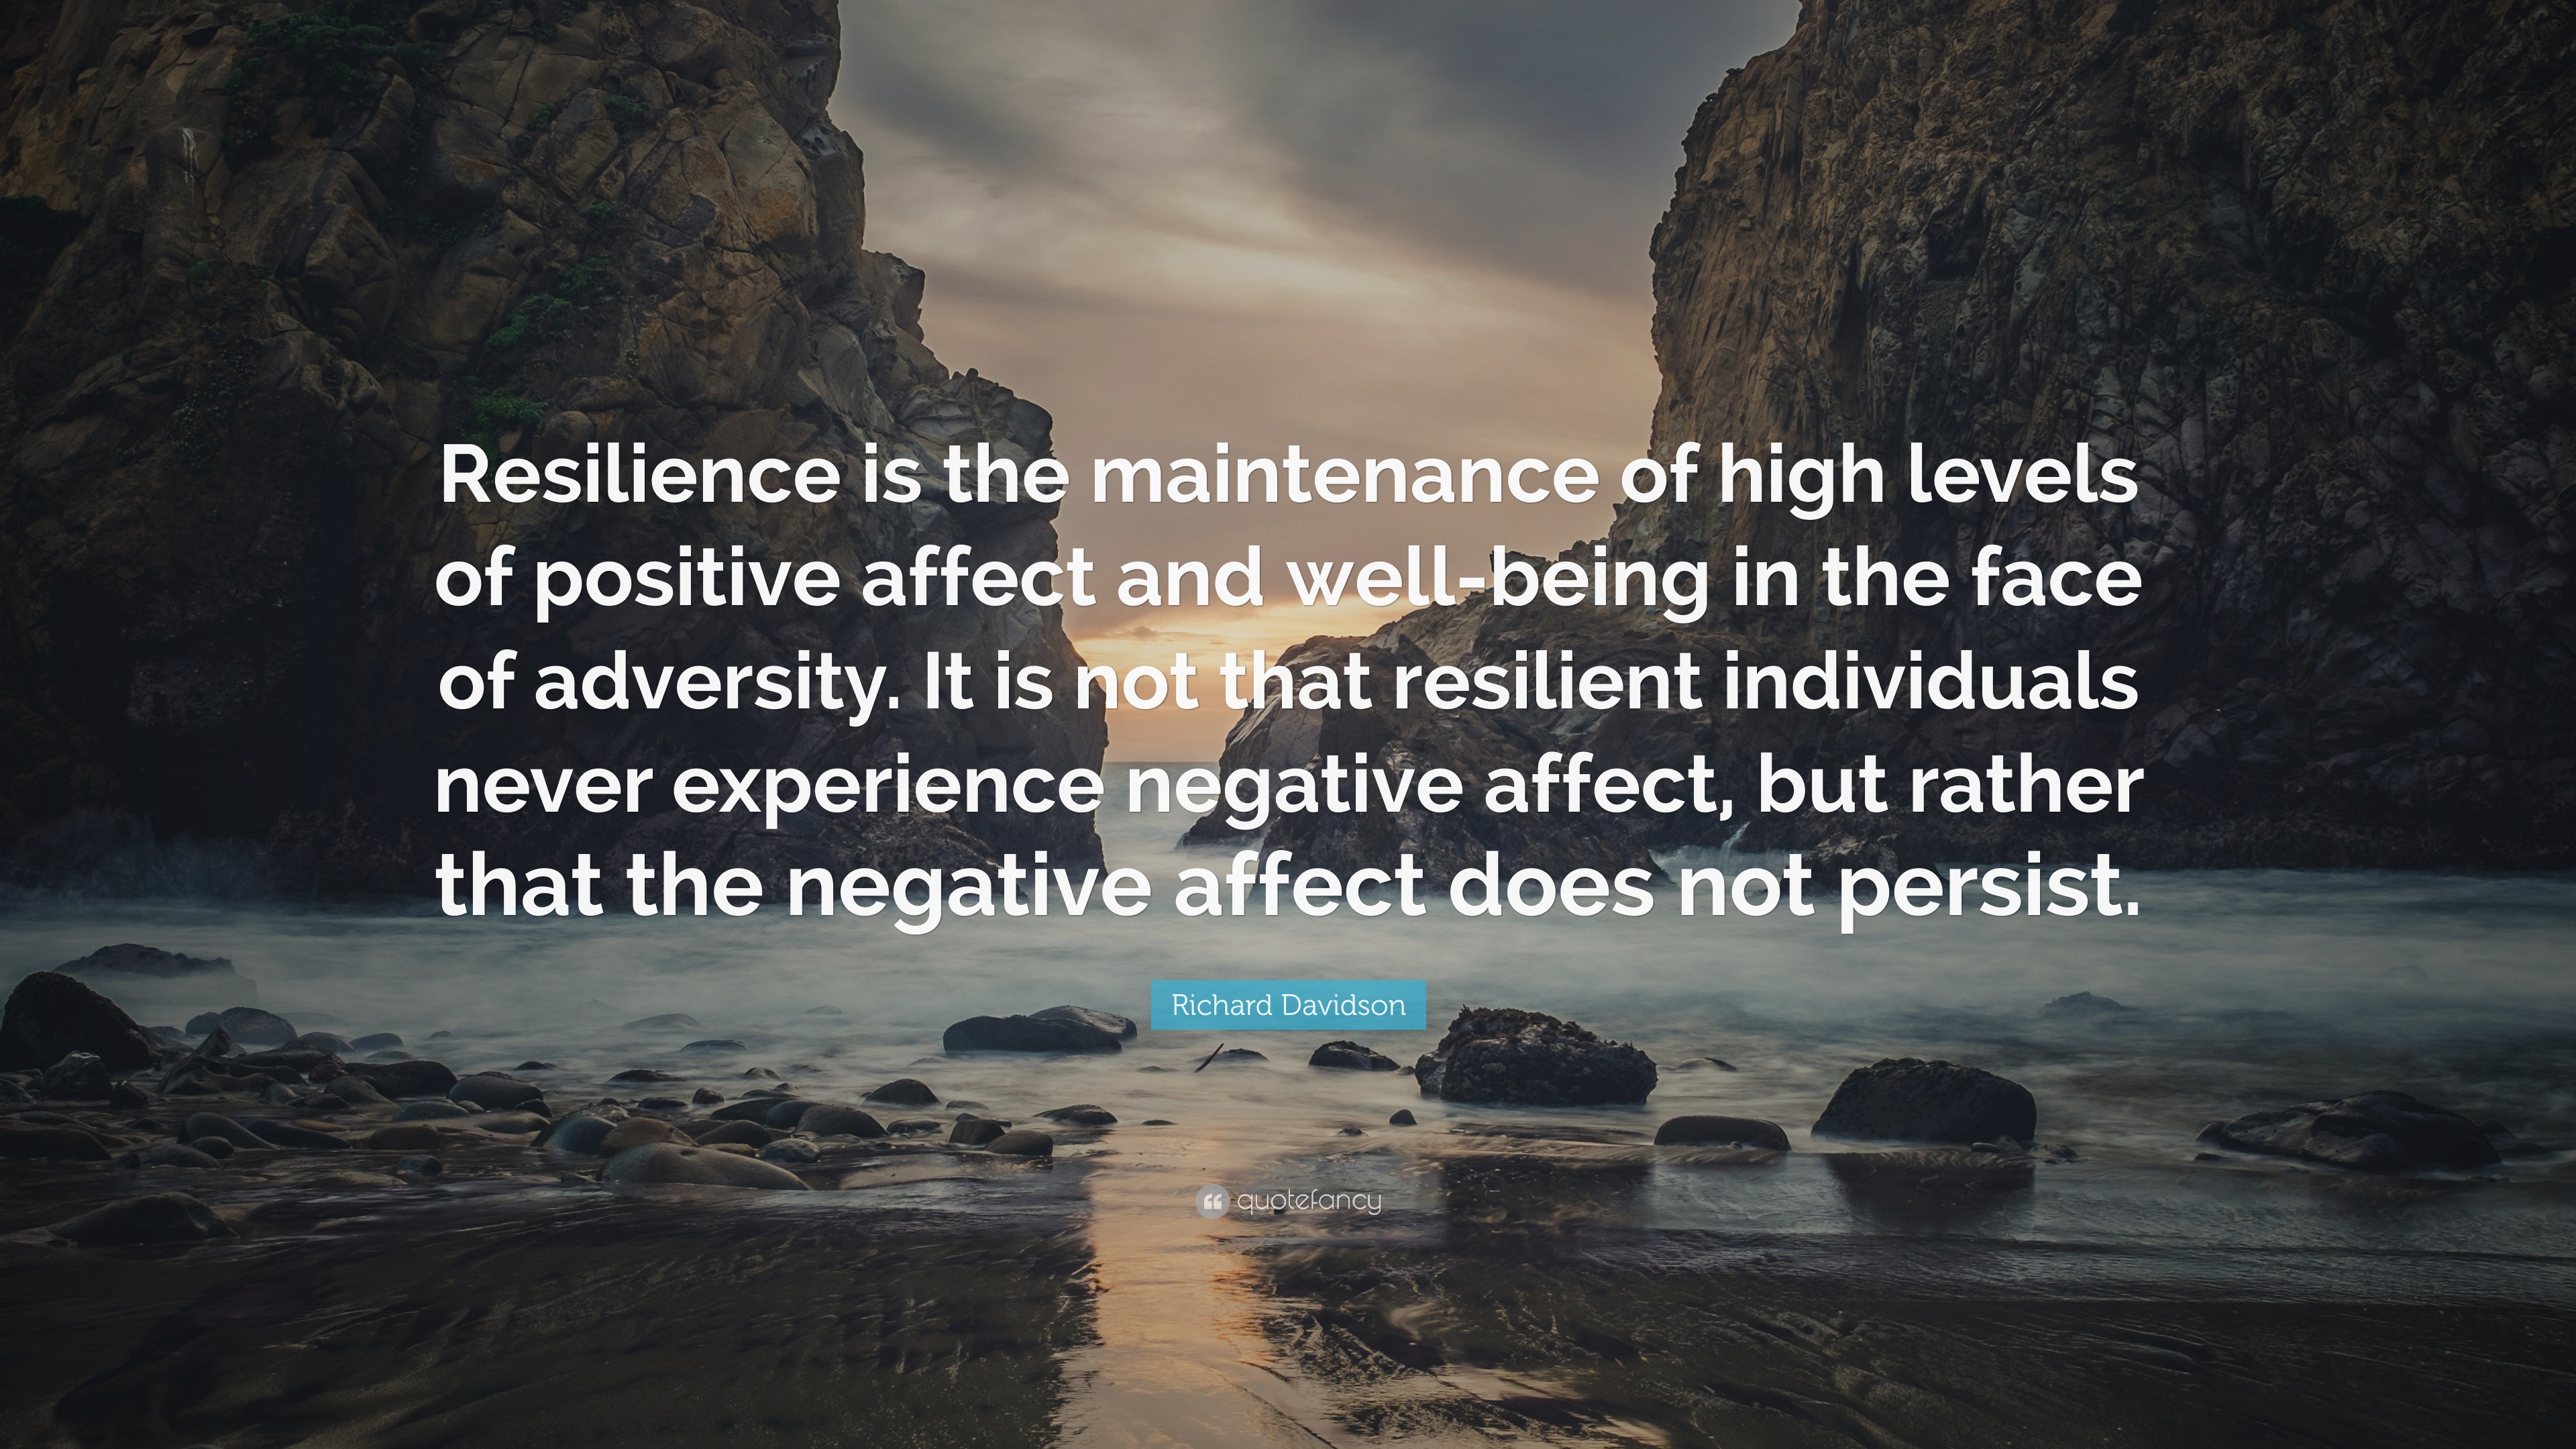 Richard Davidson Quote: “Resilience is the maintenance of high levels